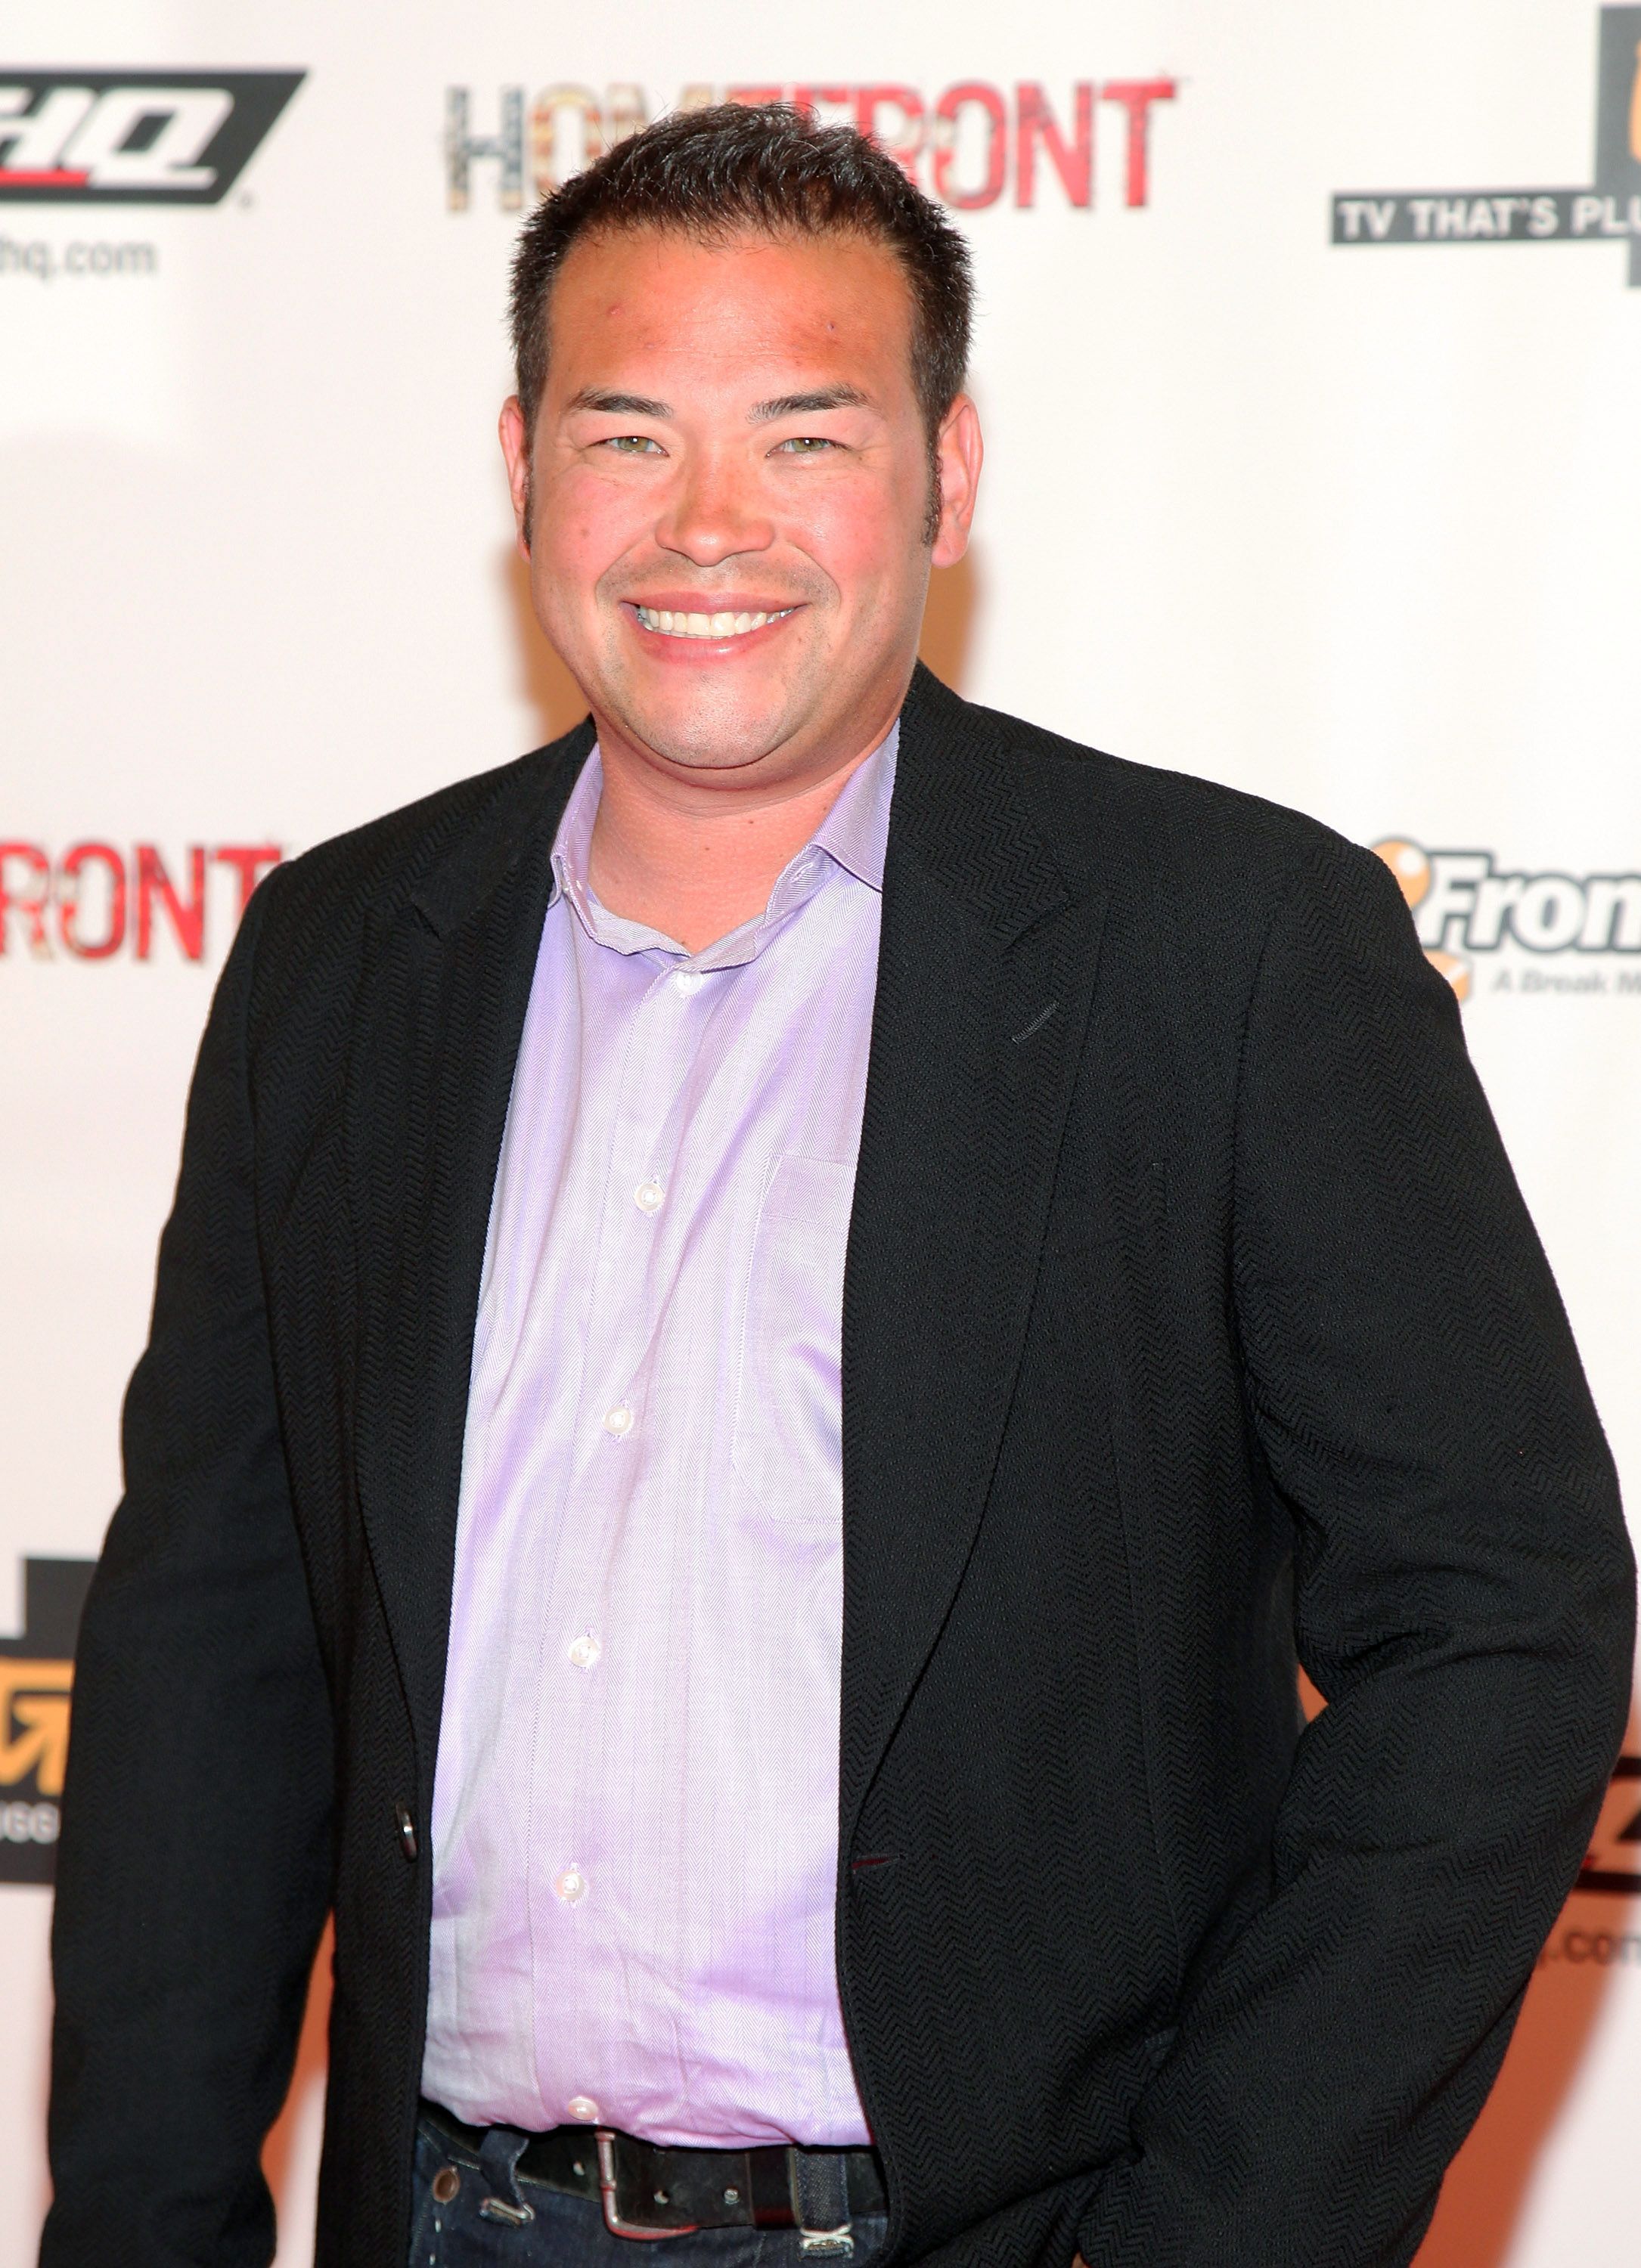 Jon Gosselin during the THQ's E3 'Take No Prisoners' event at The Standard Hotel Downtown on June 16, 2010. | Photo: Getty Images